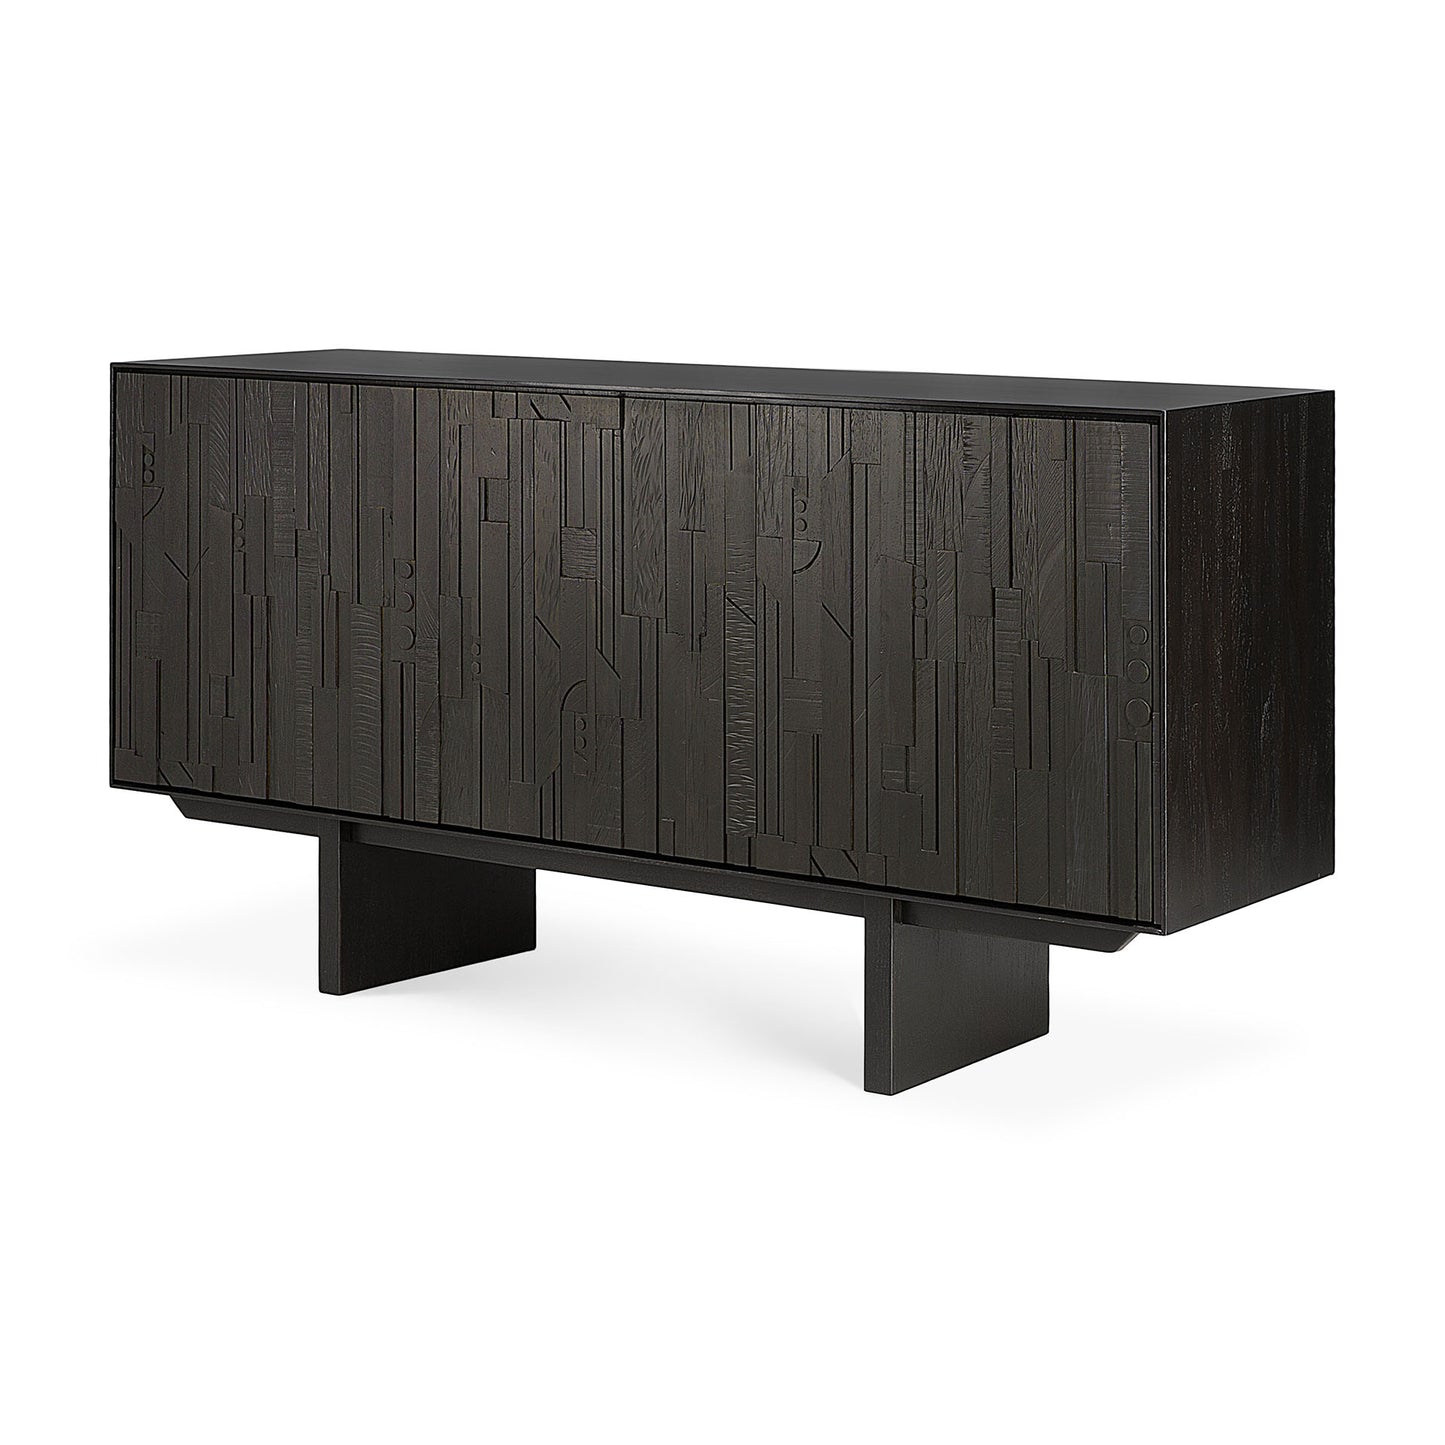 Ethnicraft Teak Grooves Buffet Sideboard is available from Make Your House A Home, Bendigo, Victoria, Australia